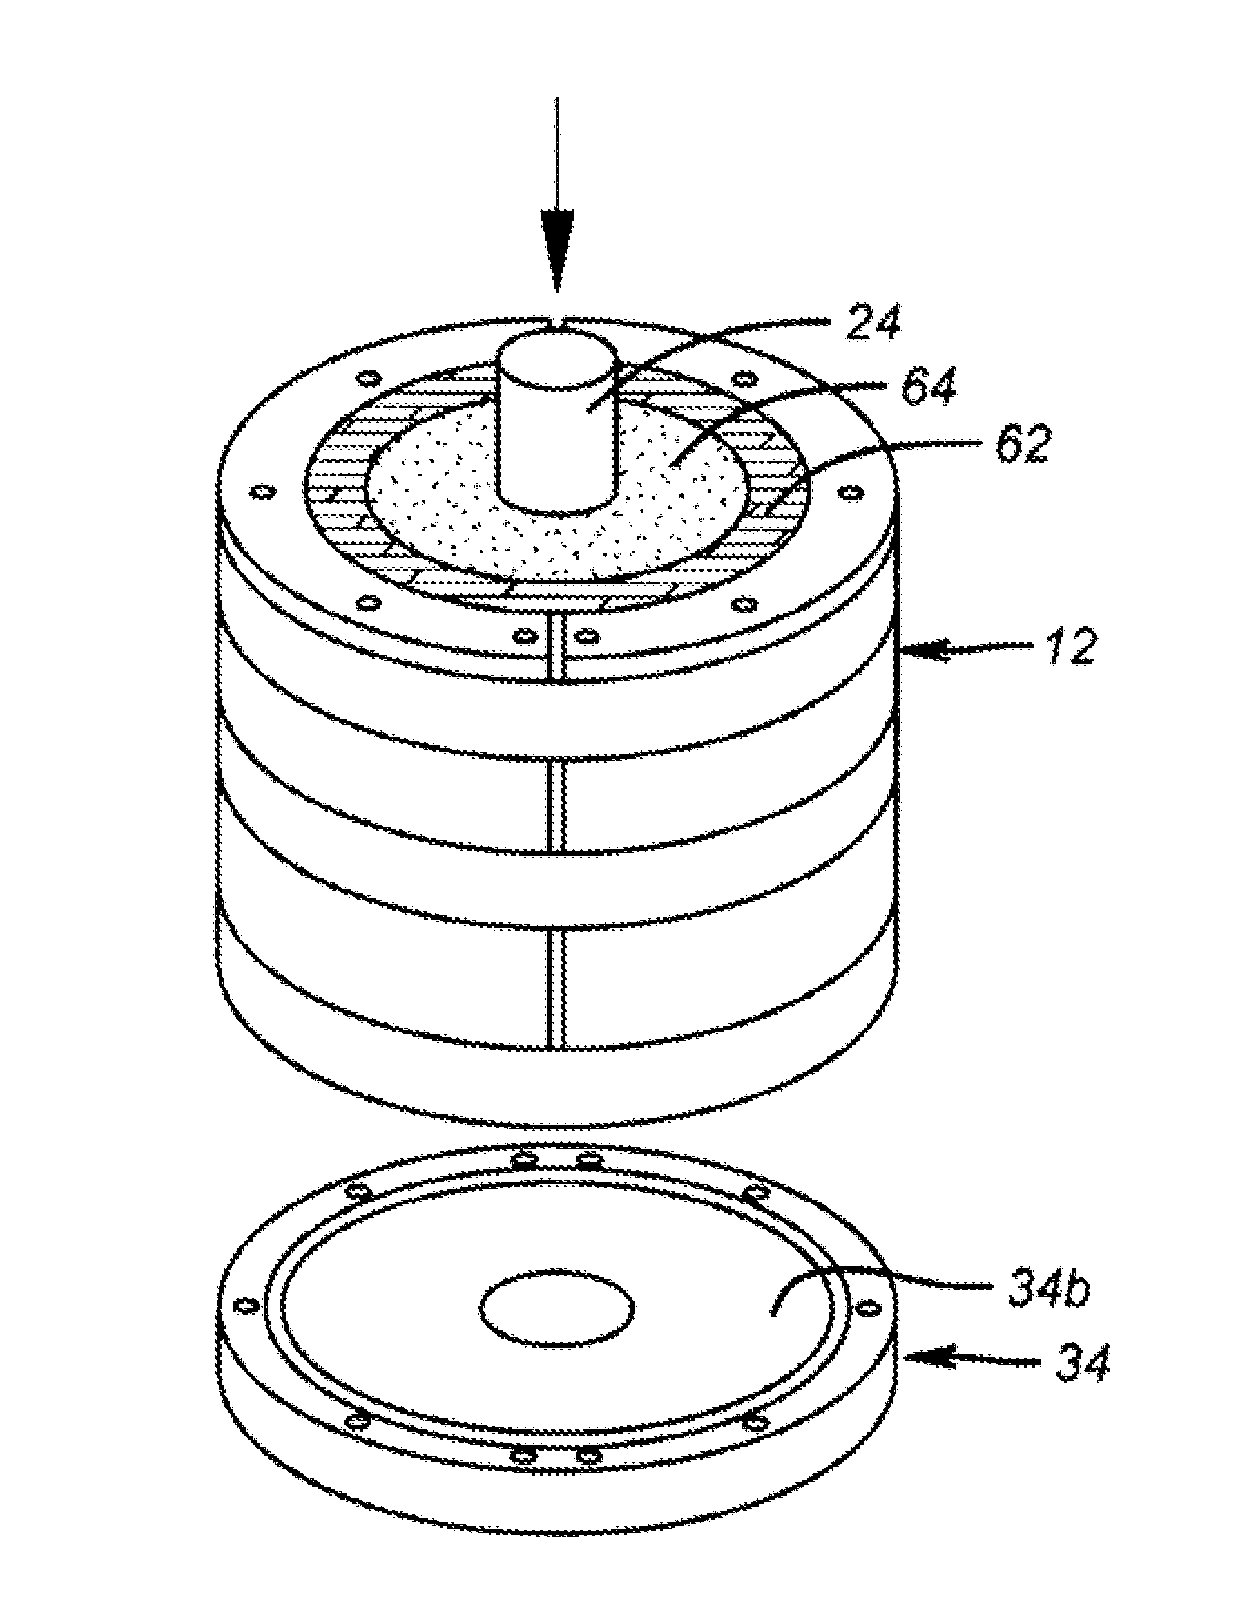 Apparatus for measuring shear bond strength of set cement and method of using same